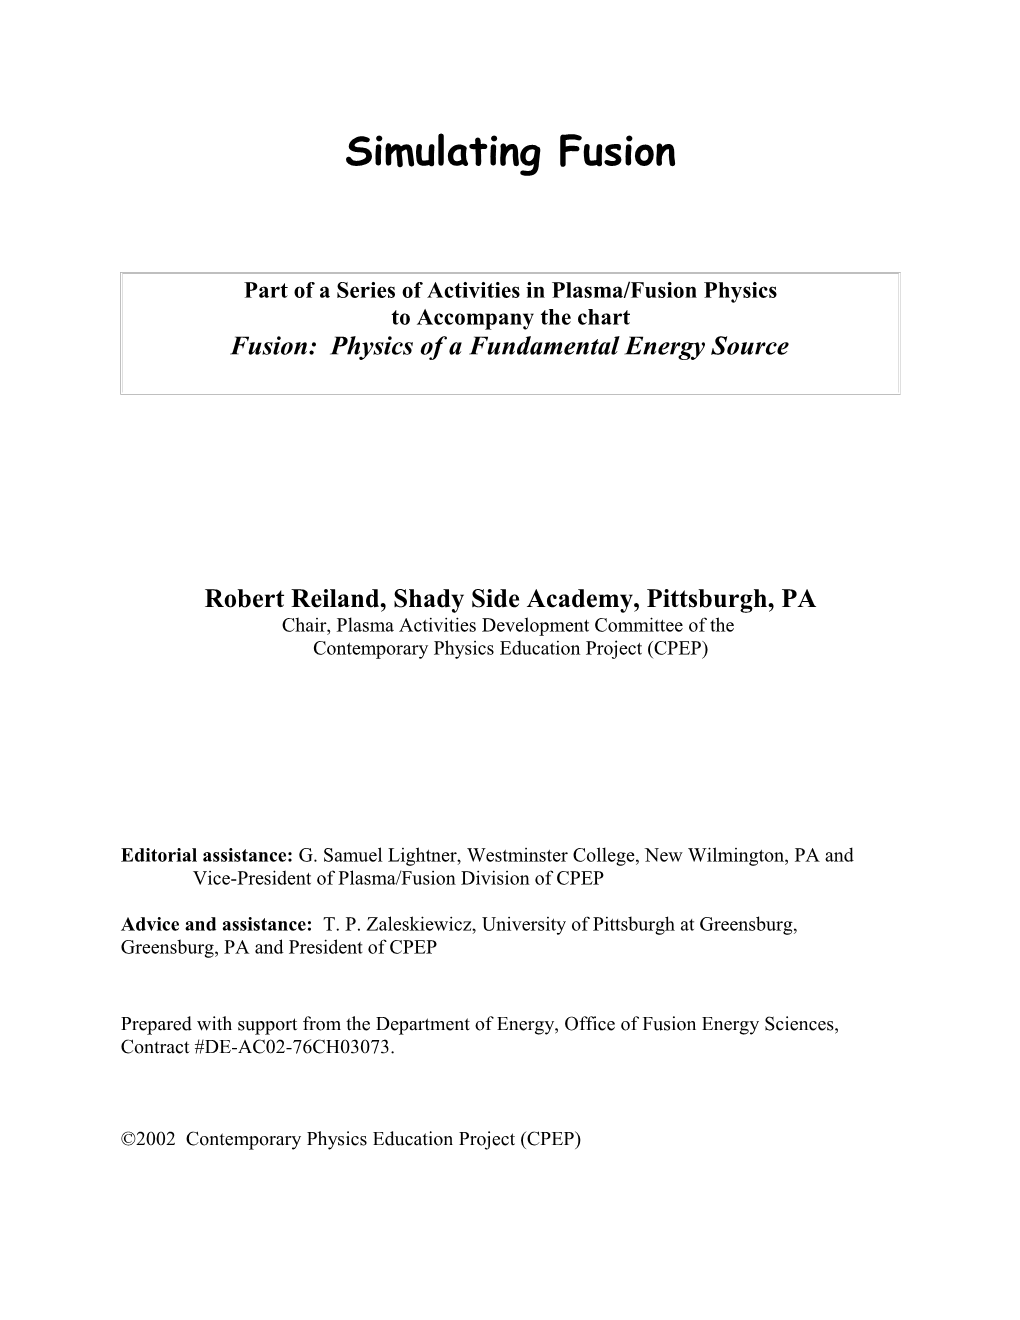 An Activity to Simulate Fusion